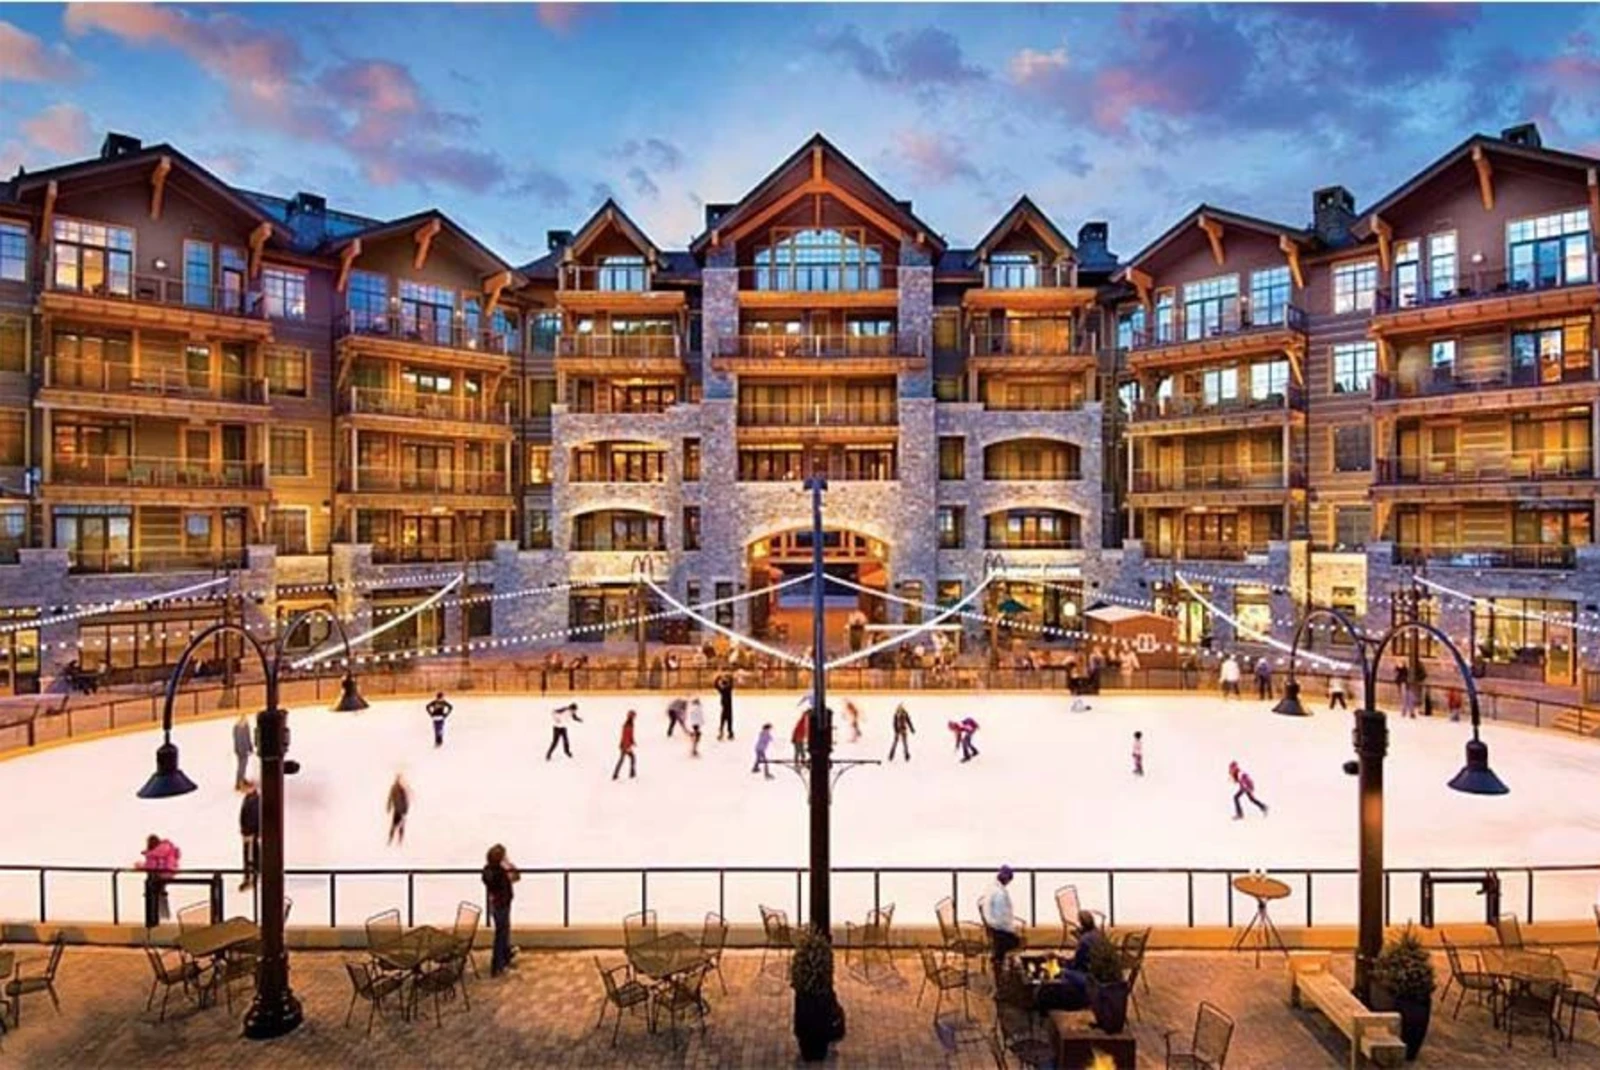 The Village at Northstar is the place that includes an ice skating rink.